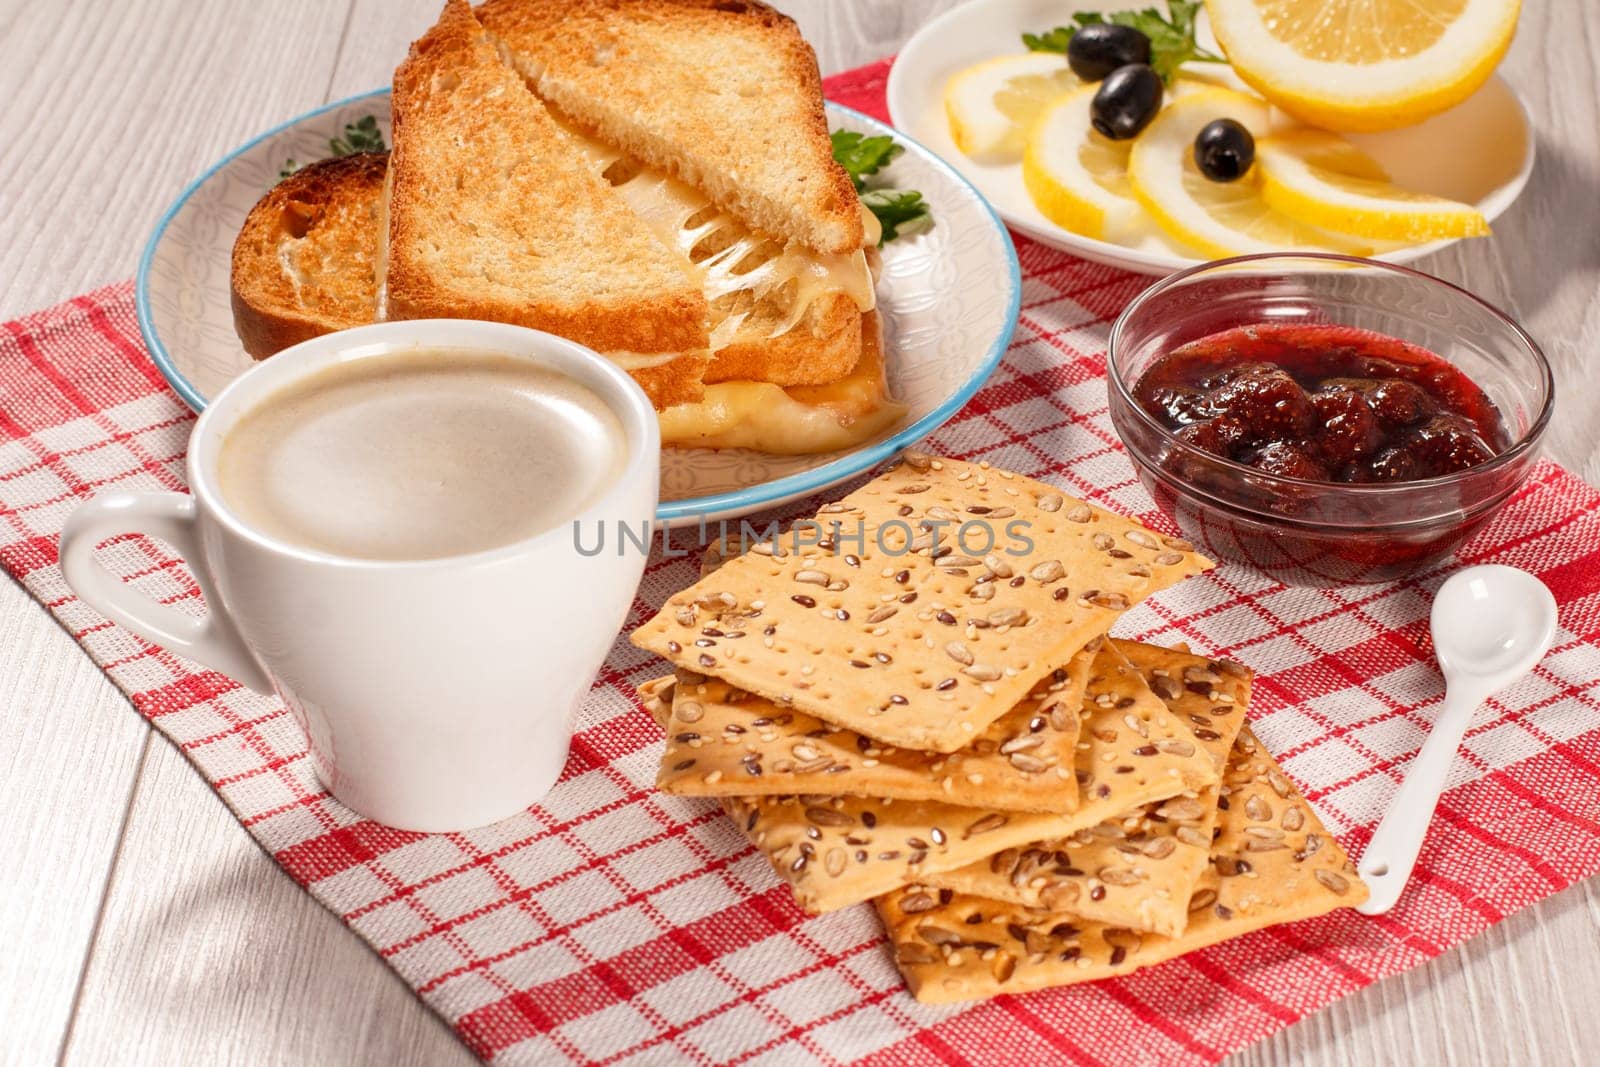 Cup of coffee, toasted slices of bread with cheese and green parsley on white plate, glass bowl with strawberry jam and spoon with red kitchen napkin. Top view. Good food for breakfast.